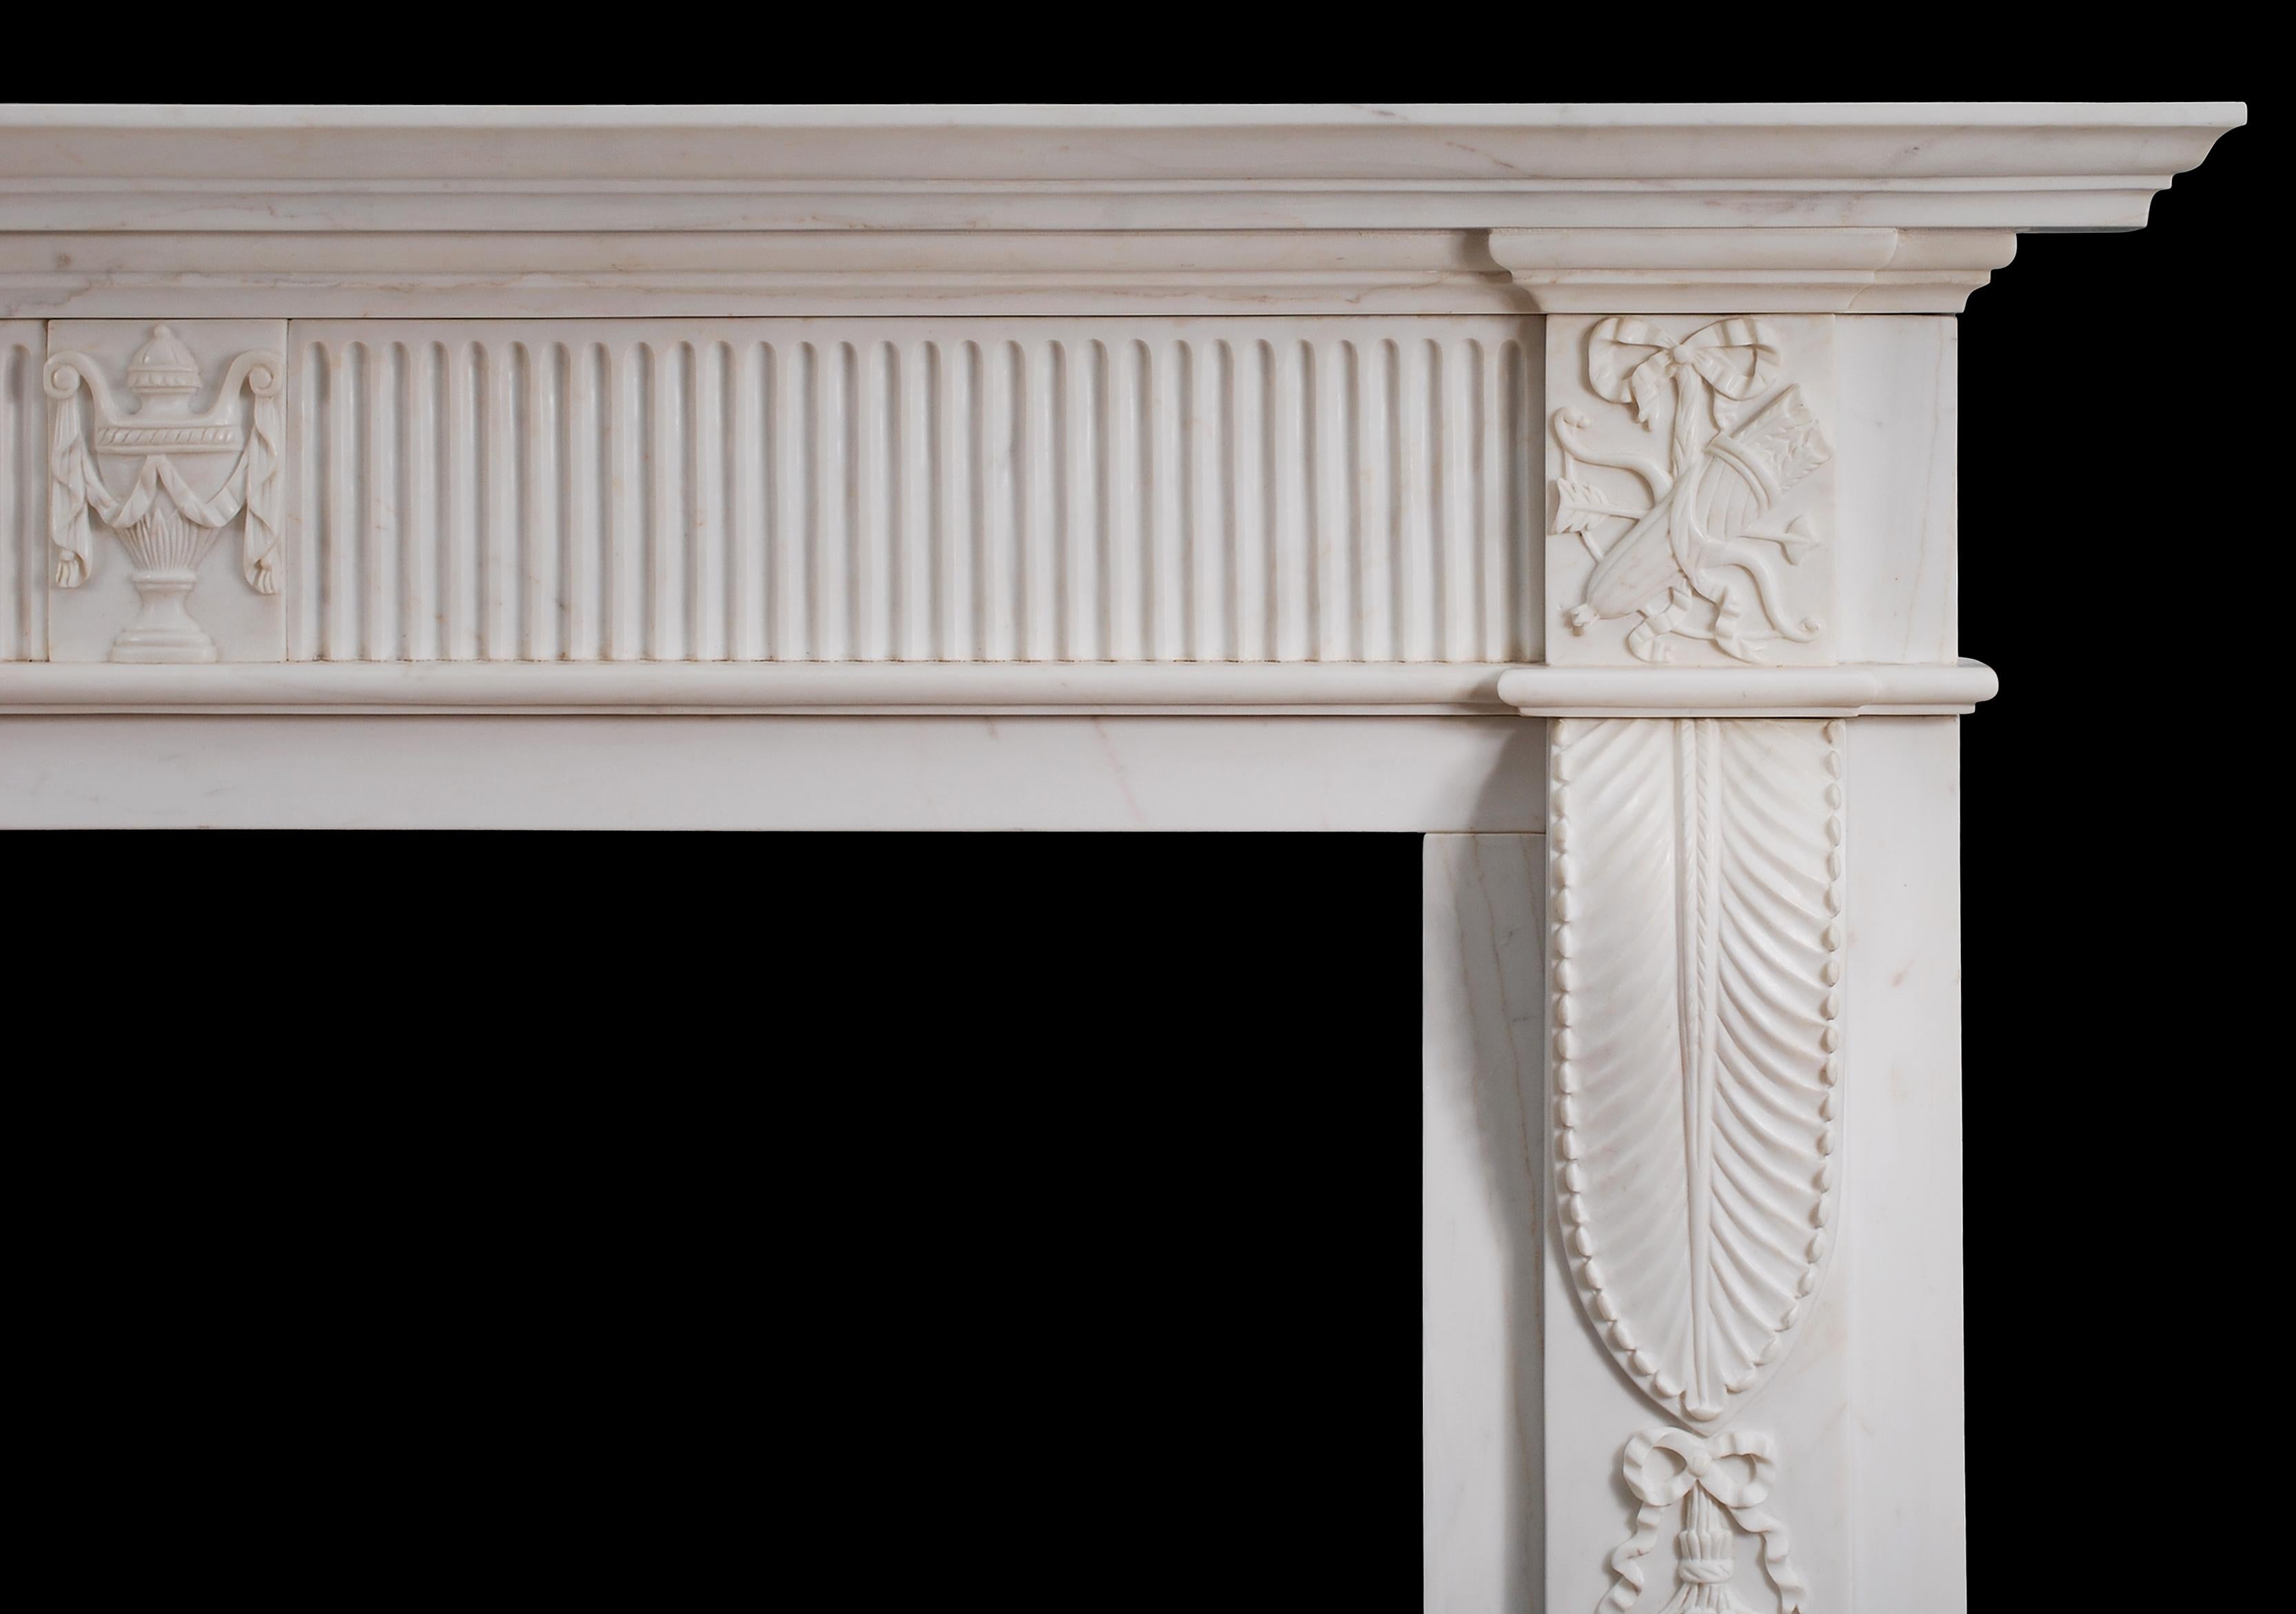 An English marble fireplace in pure white marble. The fluted frieze with carved urn to centre block and end blocks featuring quiver and swags. The jambs with shaped bracket and intricately carved foliage and drapery. Shaped, moulded